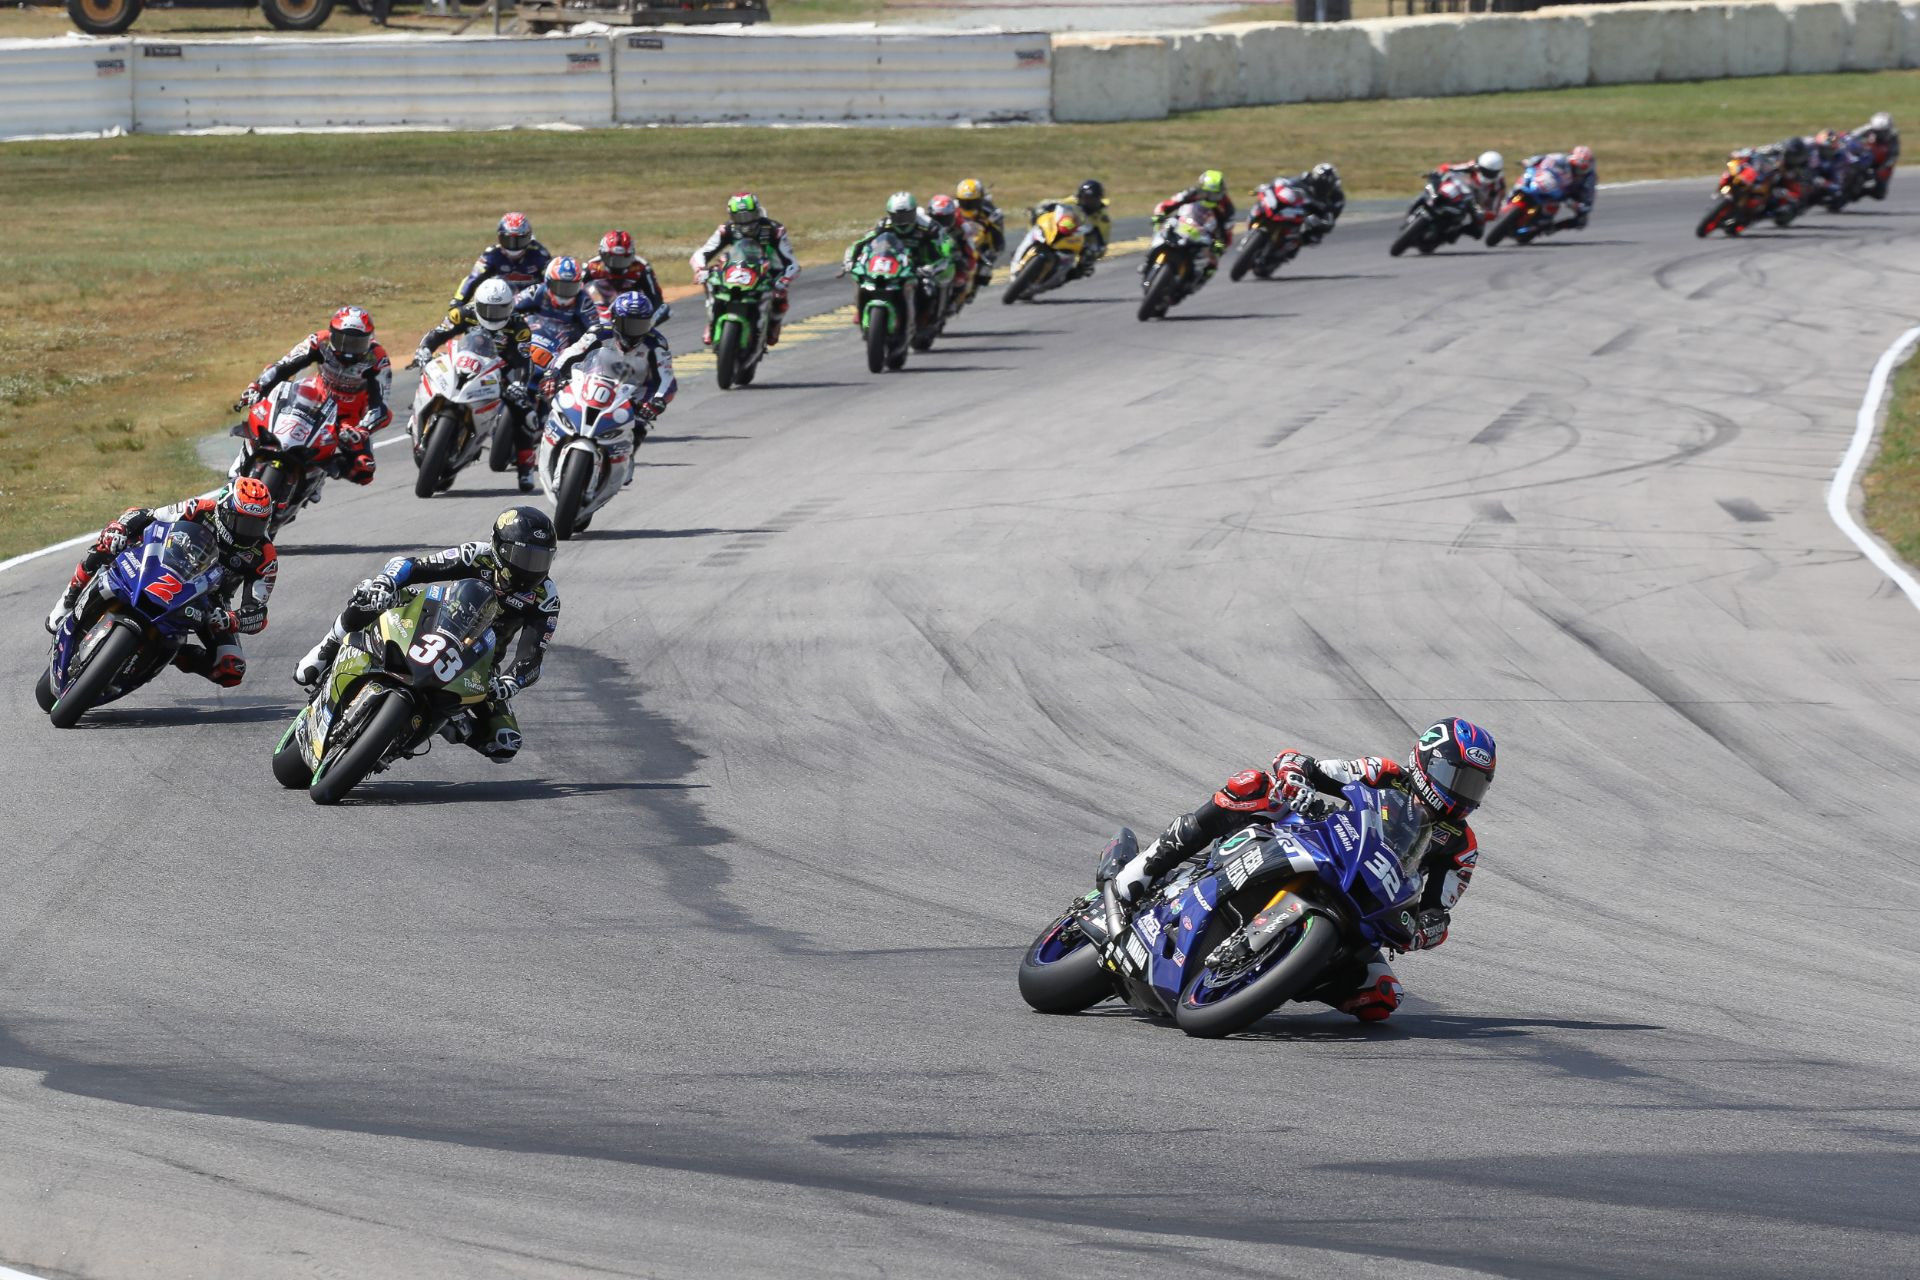 Jake Gagne (32) leads Kyle Wyman (33), Josh Herrin (2), Loris Baz (76), Travis Wyman (10), Hector Barbera (80), Bobby Fong (50) and the rest of the field at the start of Superbike Race Two. Photo by Brian J. Nelson, courtesy Yamaha.